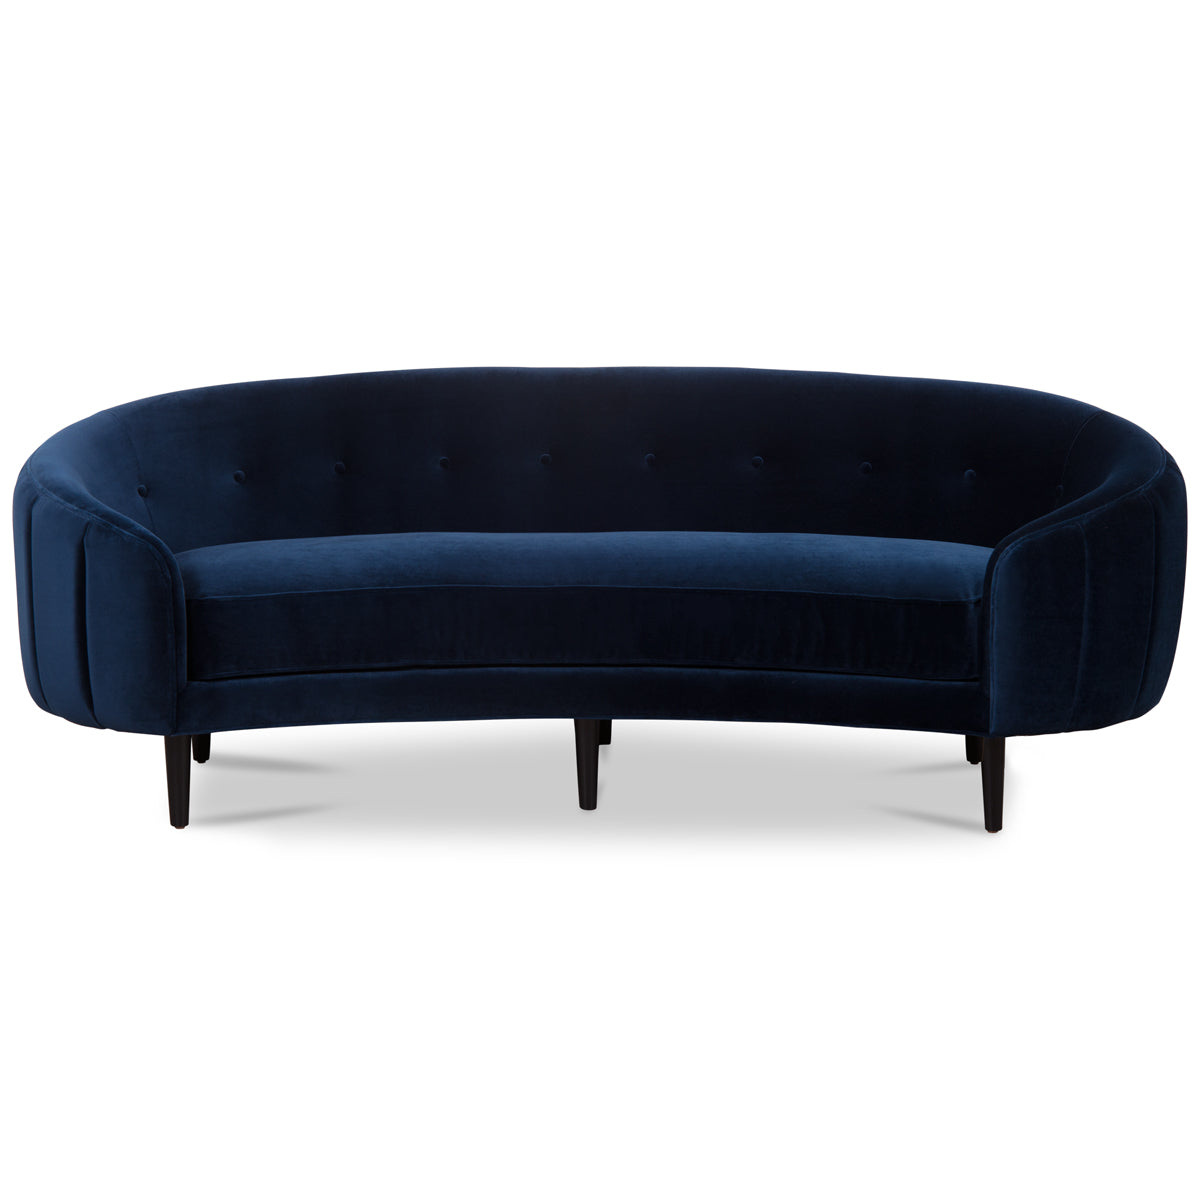 Art Deco style petite sofa with a channel tufted back, six black cone legs, a low back that extends into rounded arms and velvet como indigo upholstery throughout.